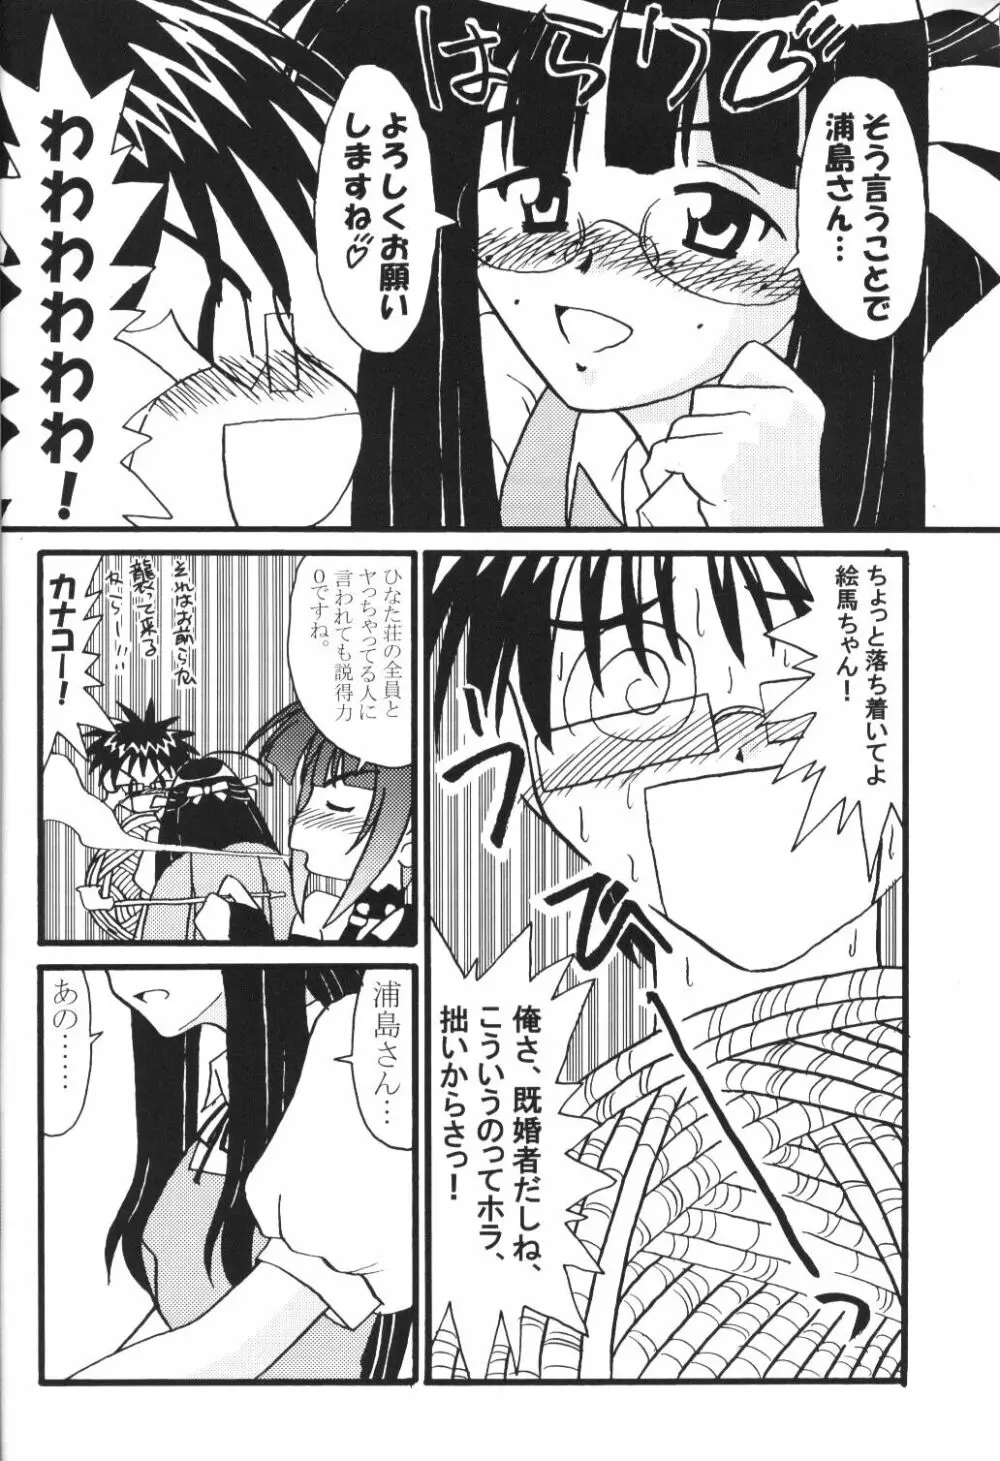 Sex Appeal 5 「セクあぴ」 - page9